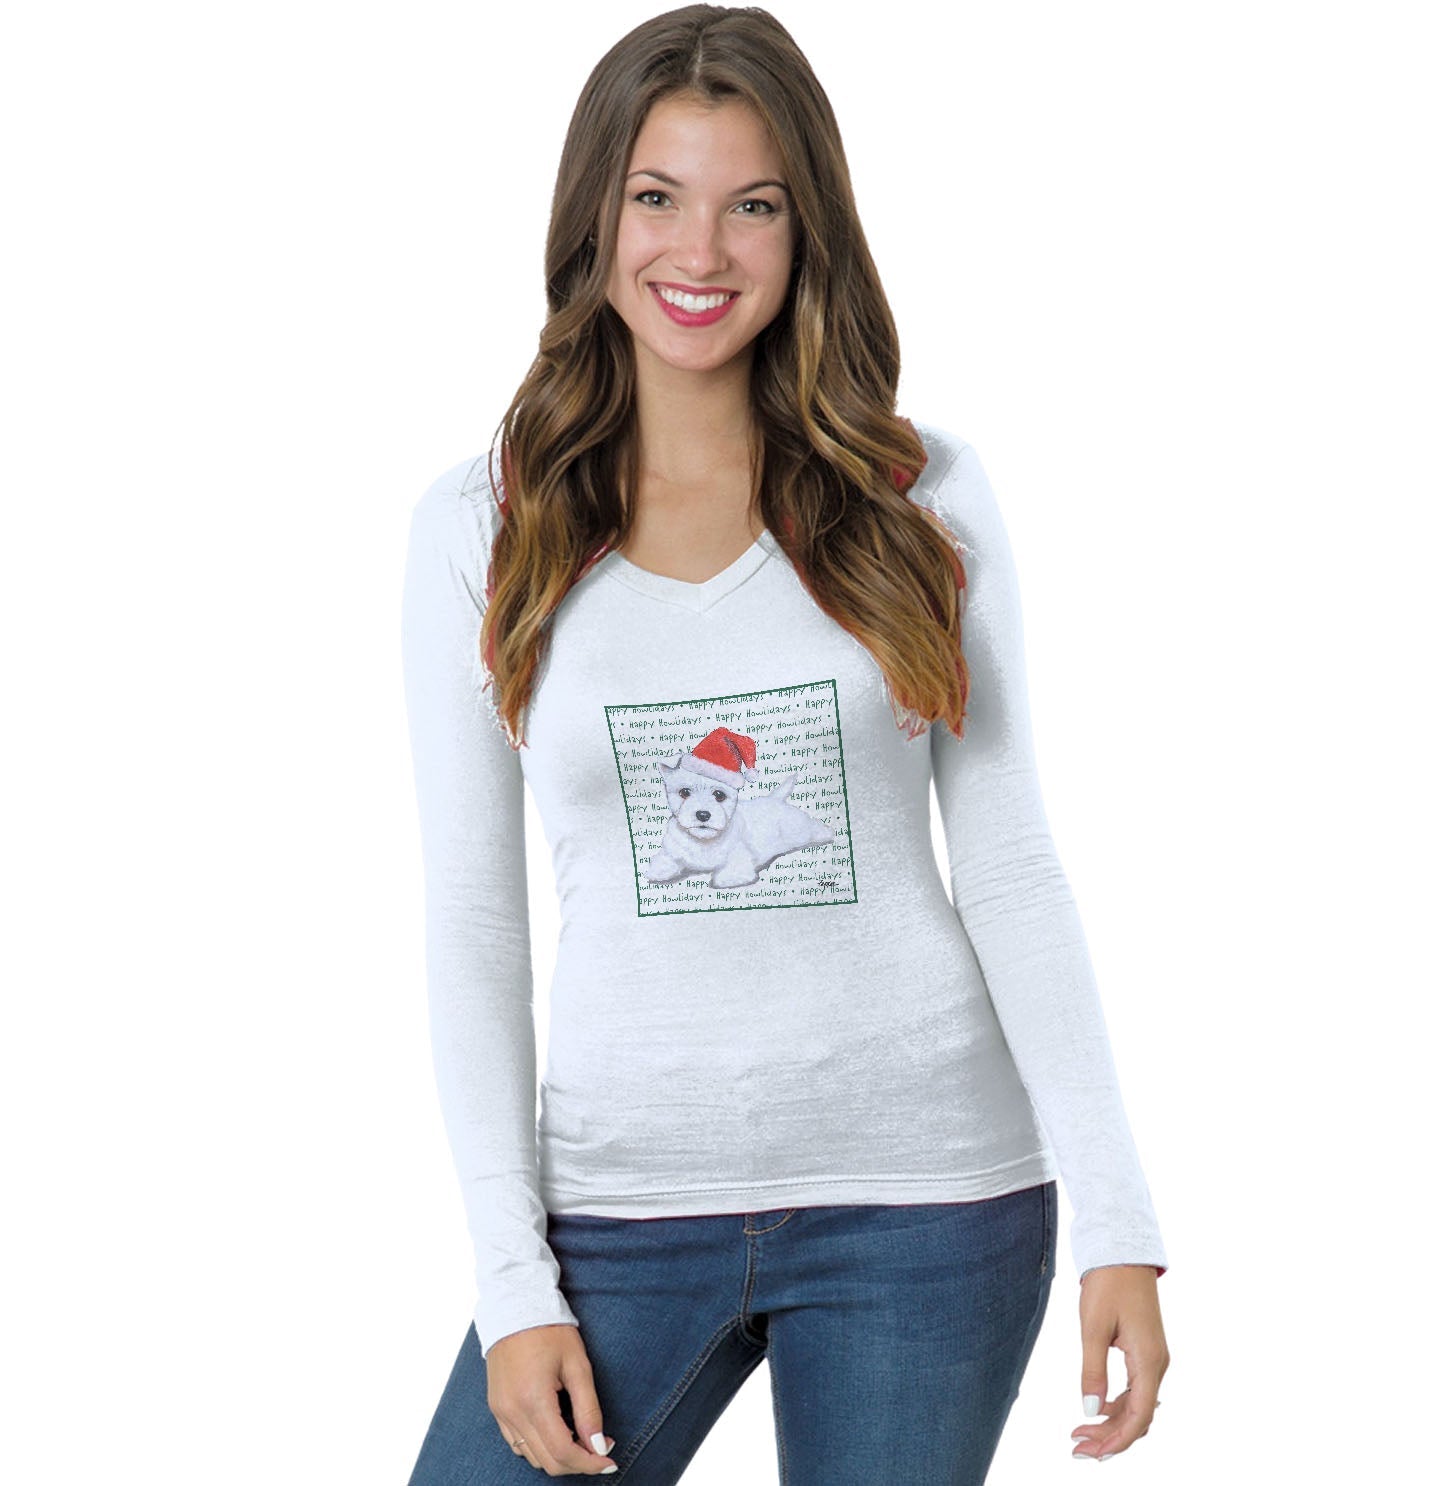 West Highland White Terrier Puppy Happy Howlidays Text - Women's V-Neck Long Sleeve T-Shirt